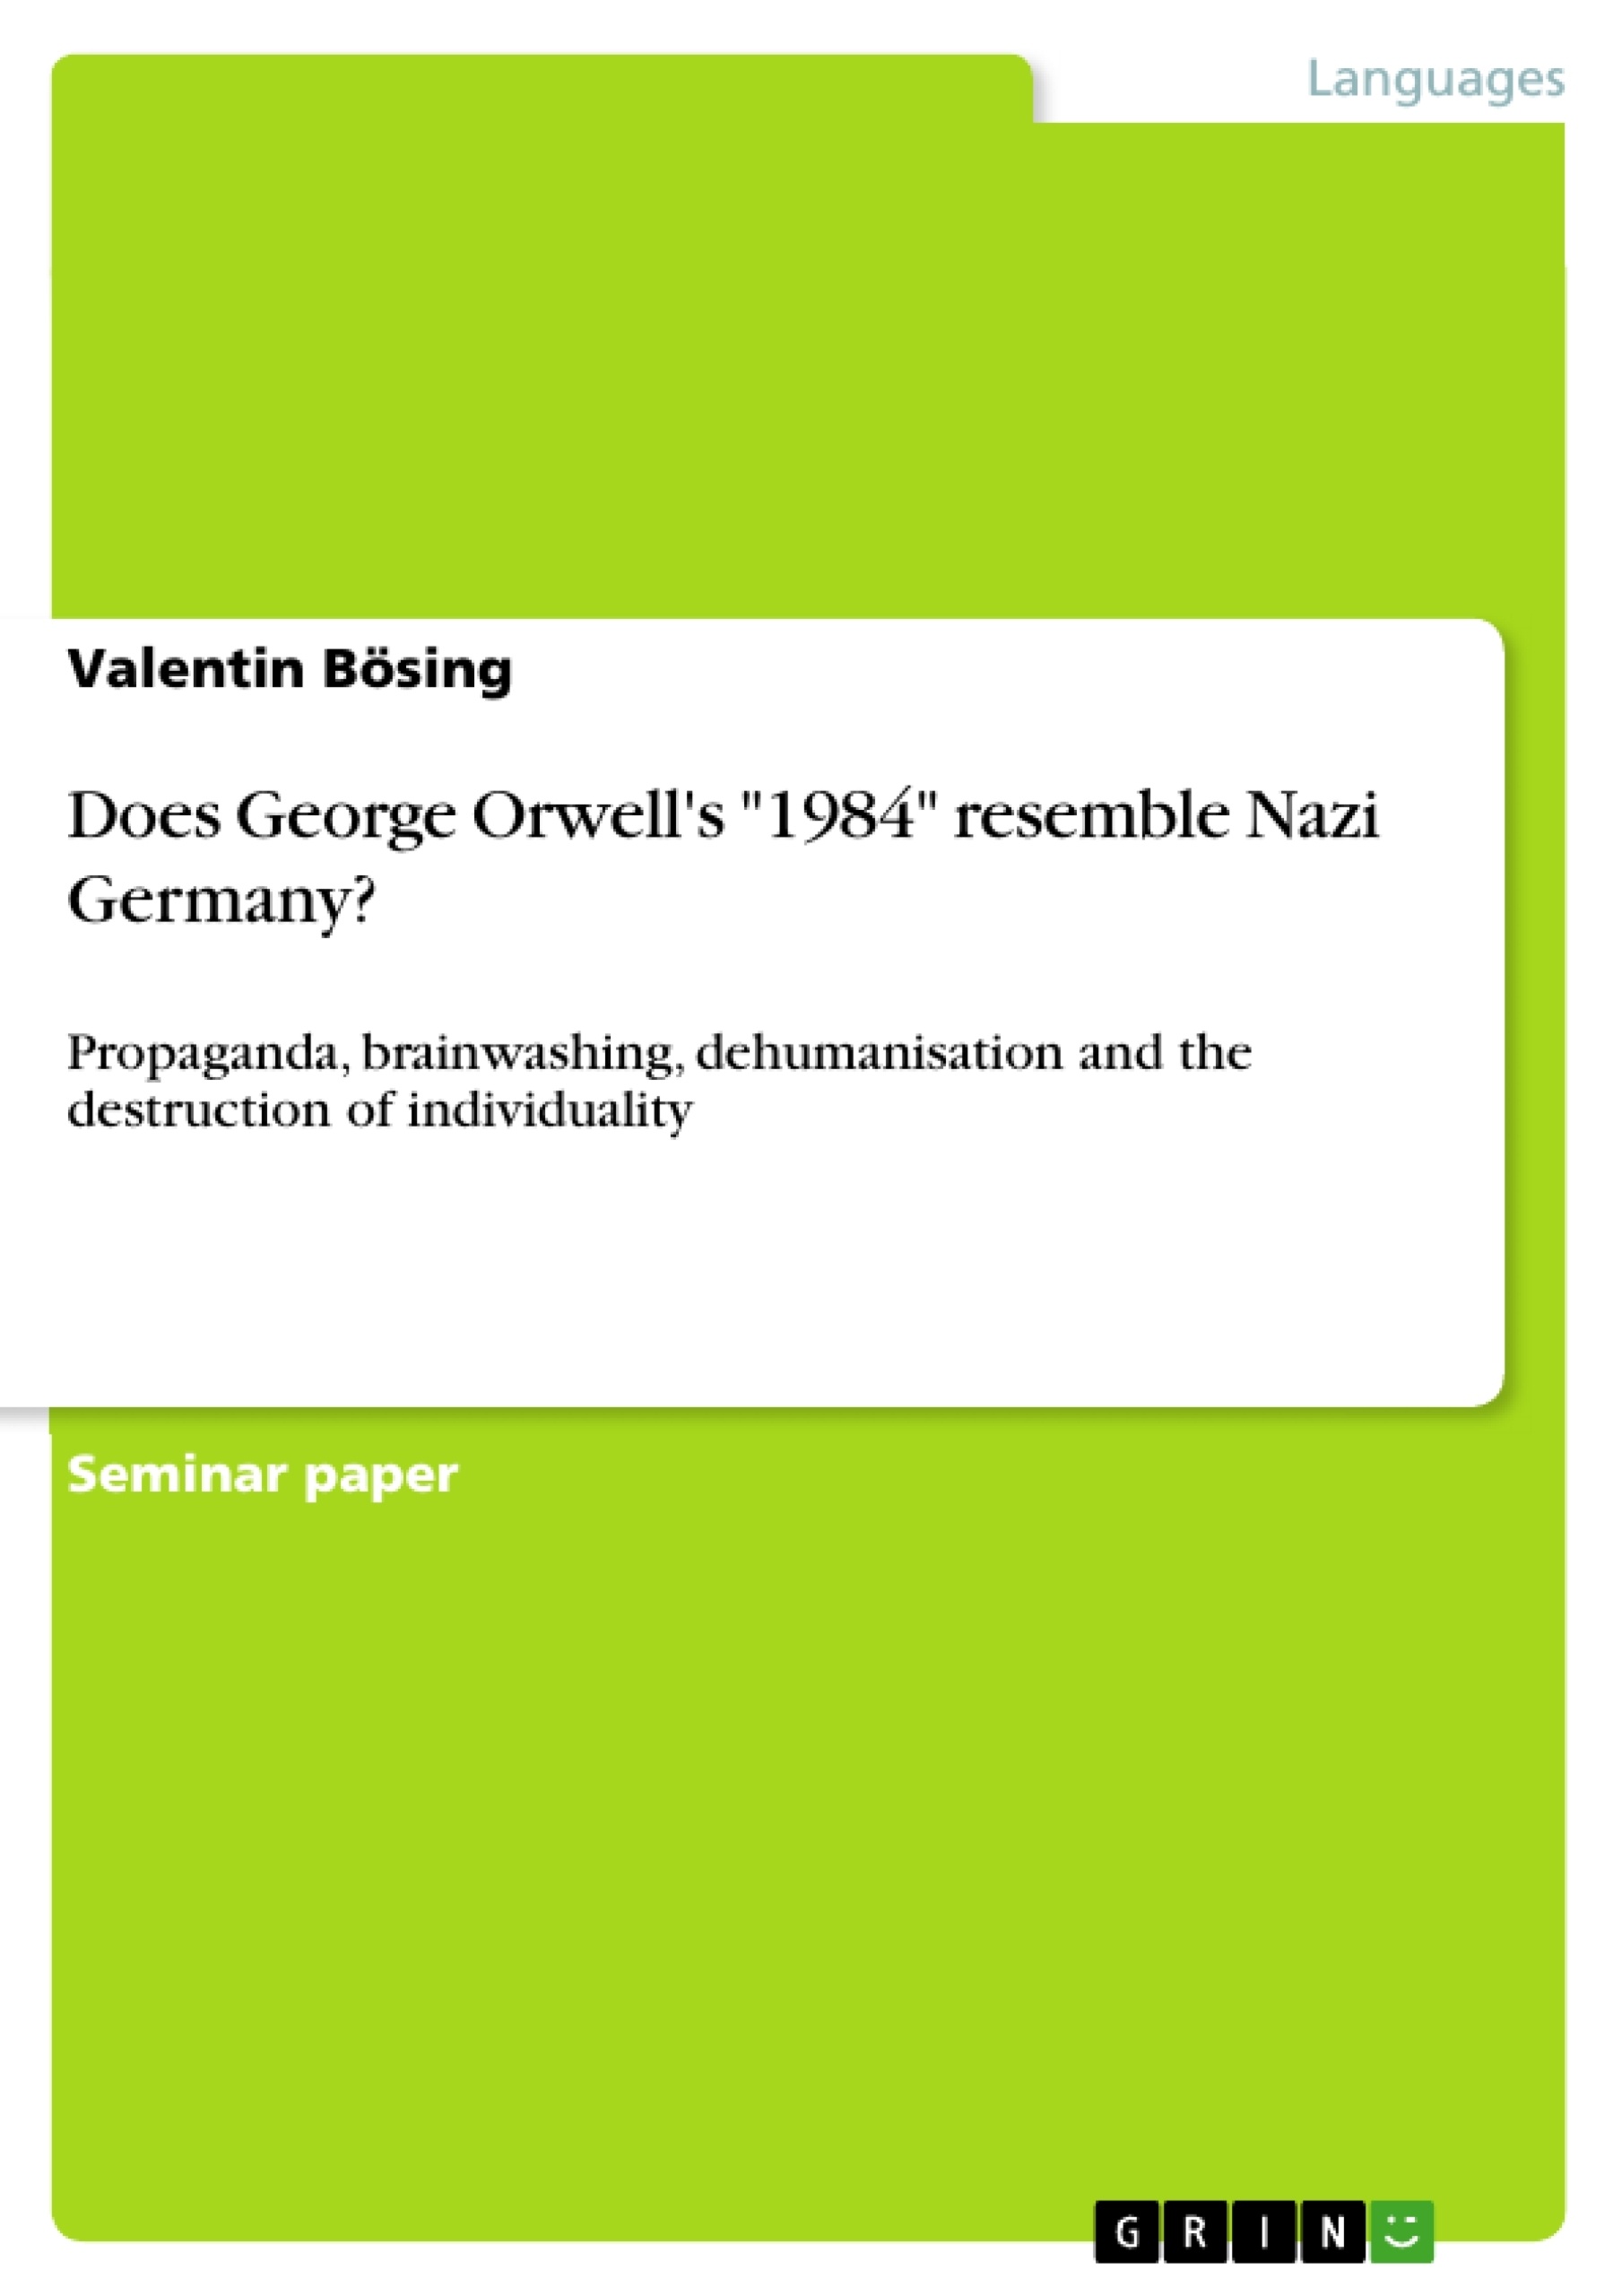 Title: Does George Orwell's "1984" resemble Nazi Germany?